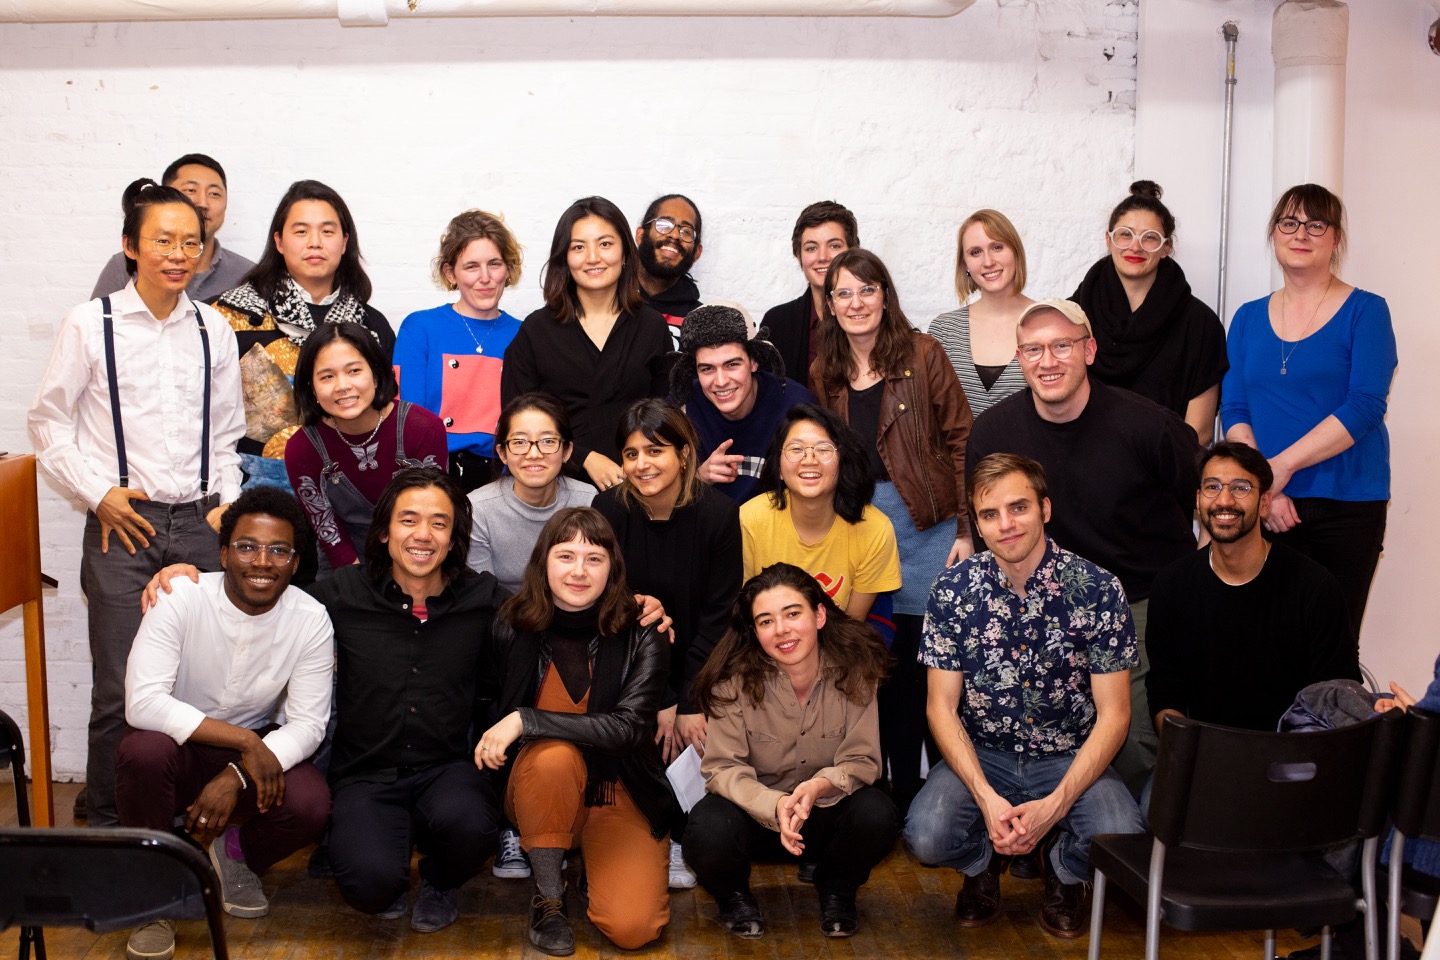 "A photo of all the Code Societies Winter 2019 students, TAs (Nabil Hassein and Ying Quan Tan) and organizer Melanie Hoff."